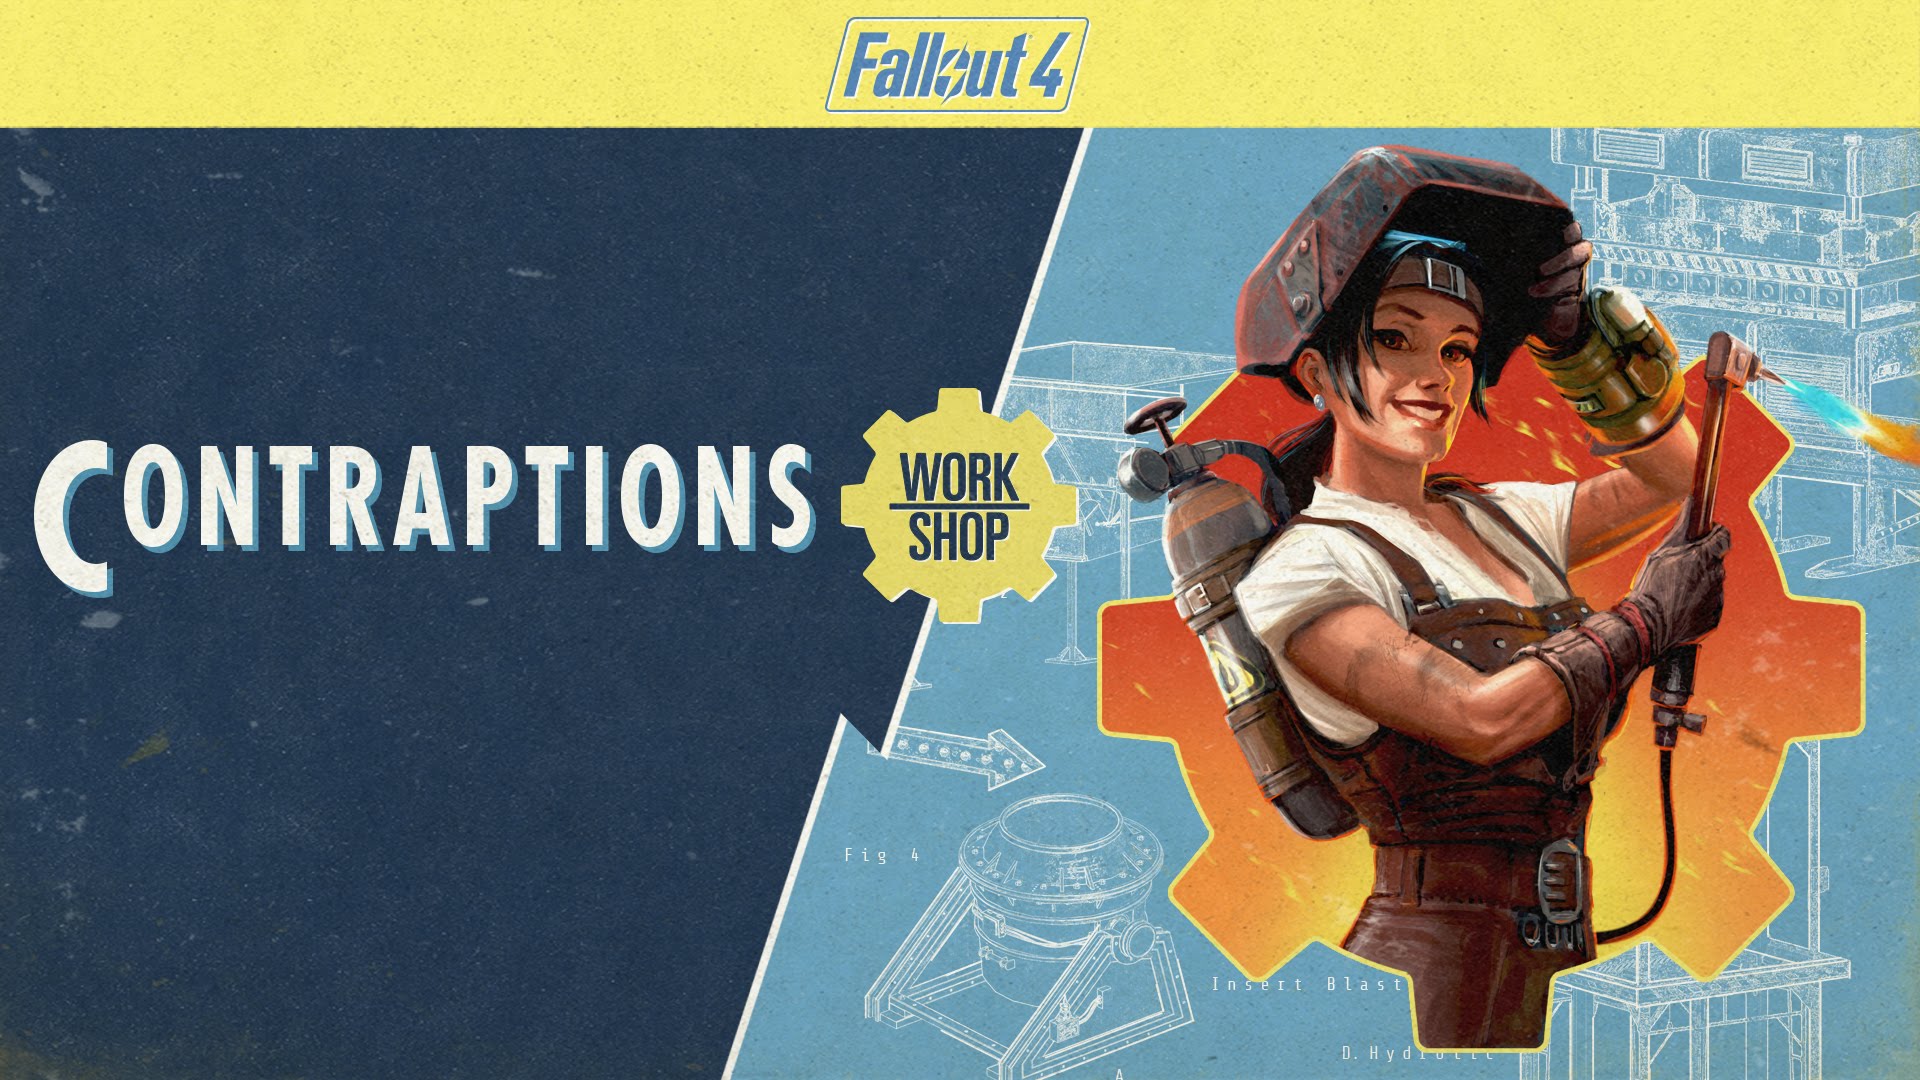 Fallout 4 contraptions workshop nuka world фото 1